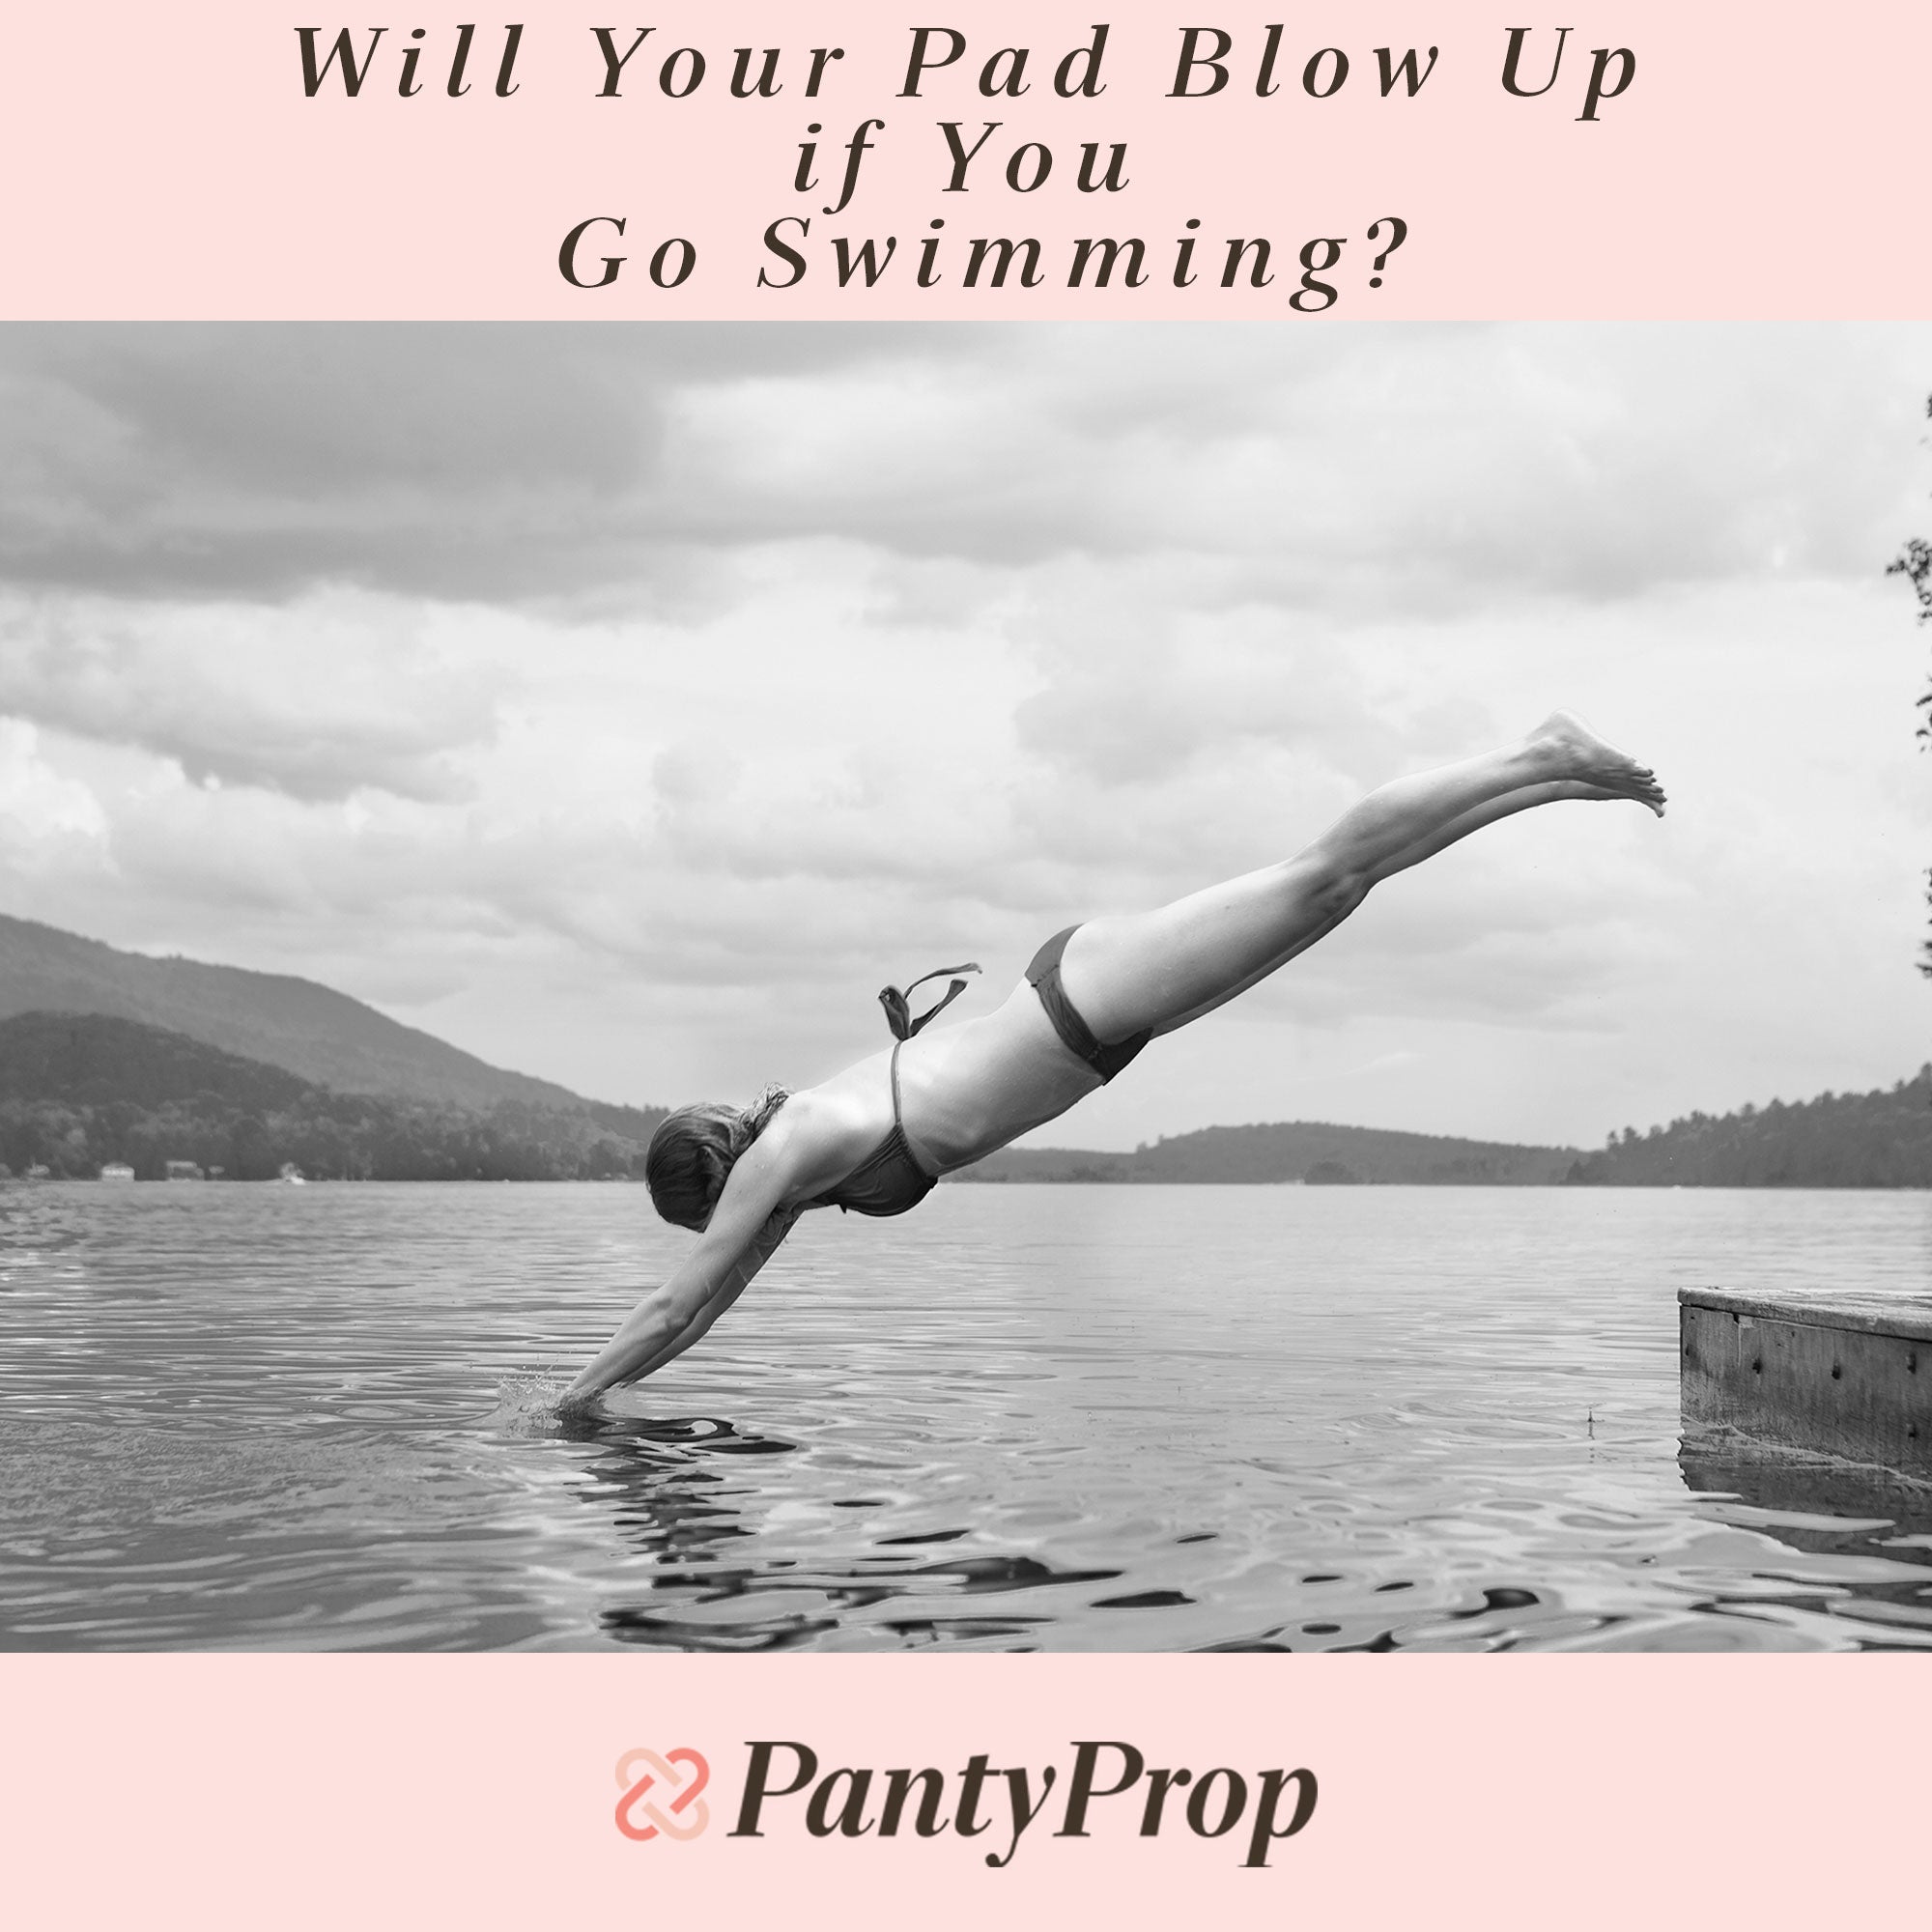 Will Your Pad Blow Up if You Go Swimming on Your Period?